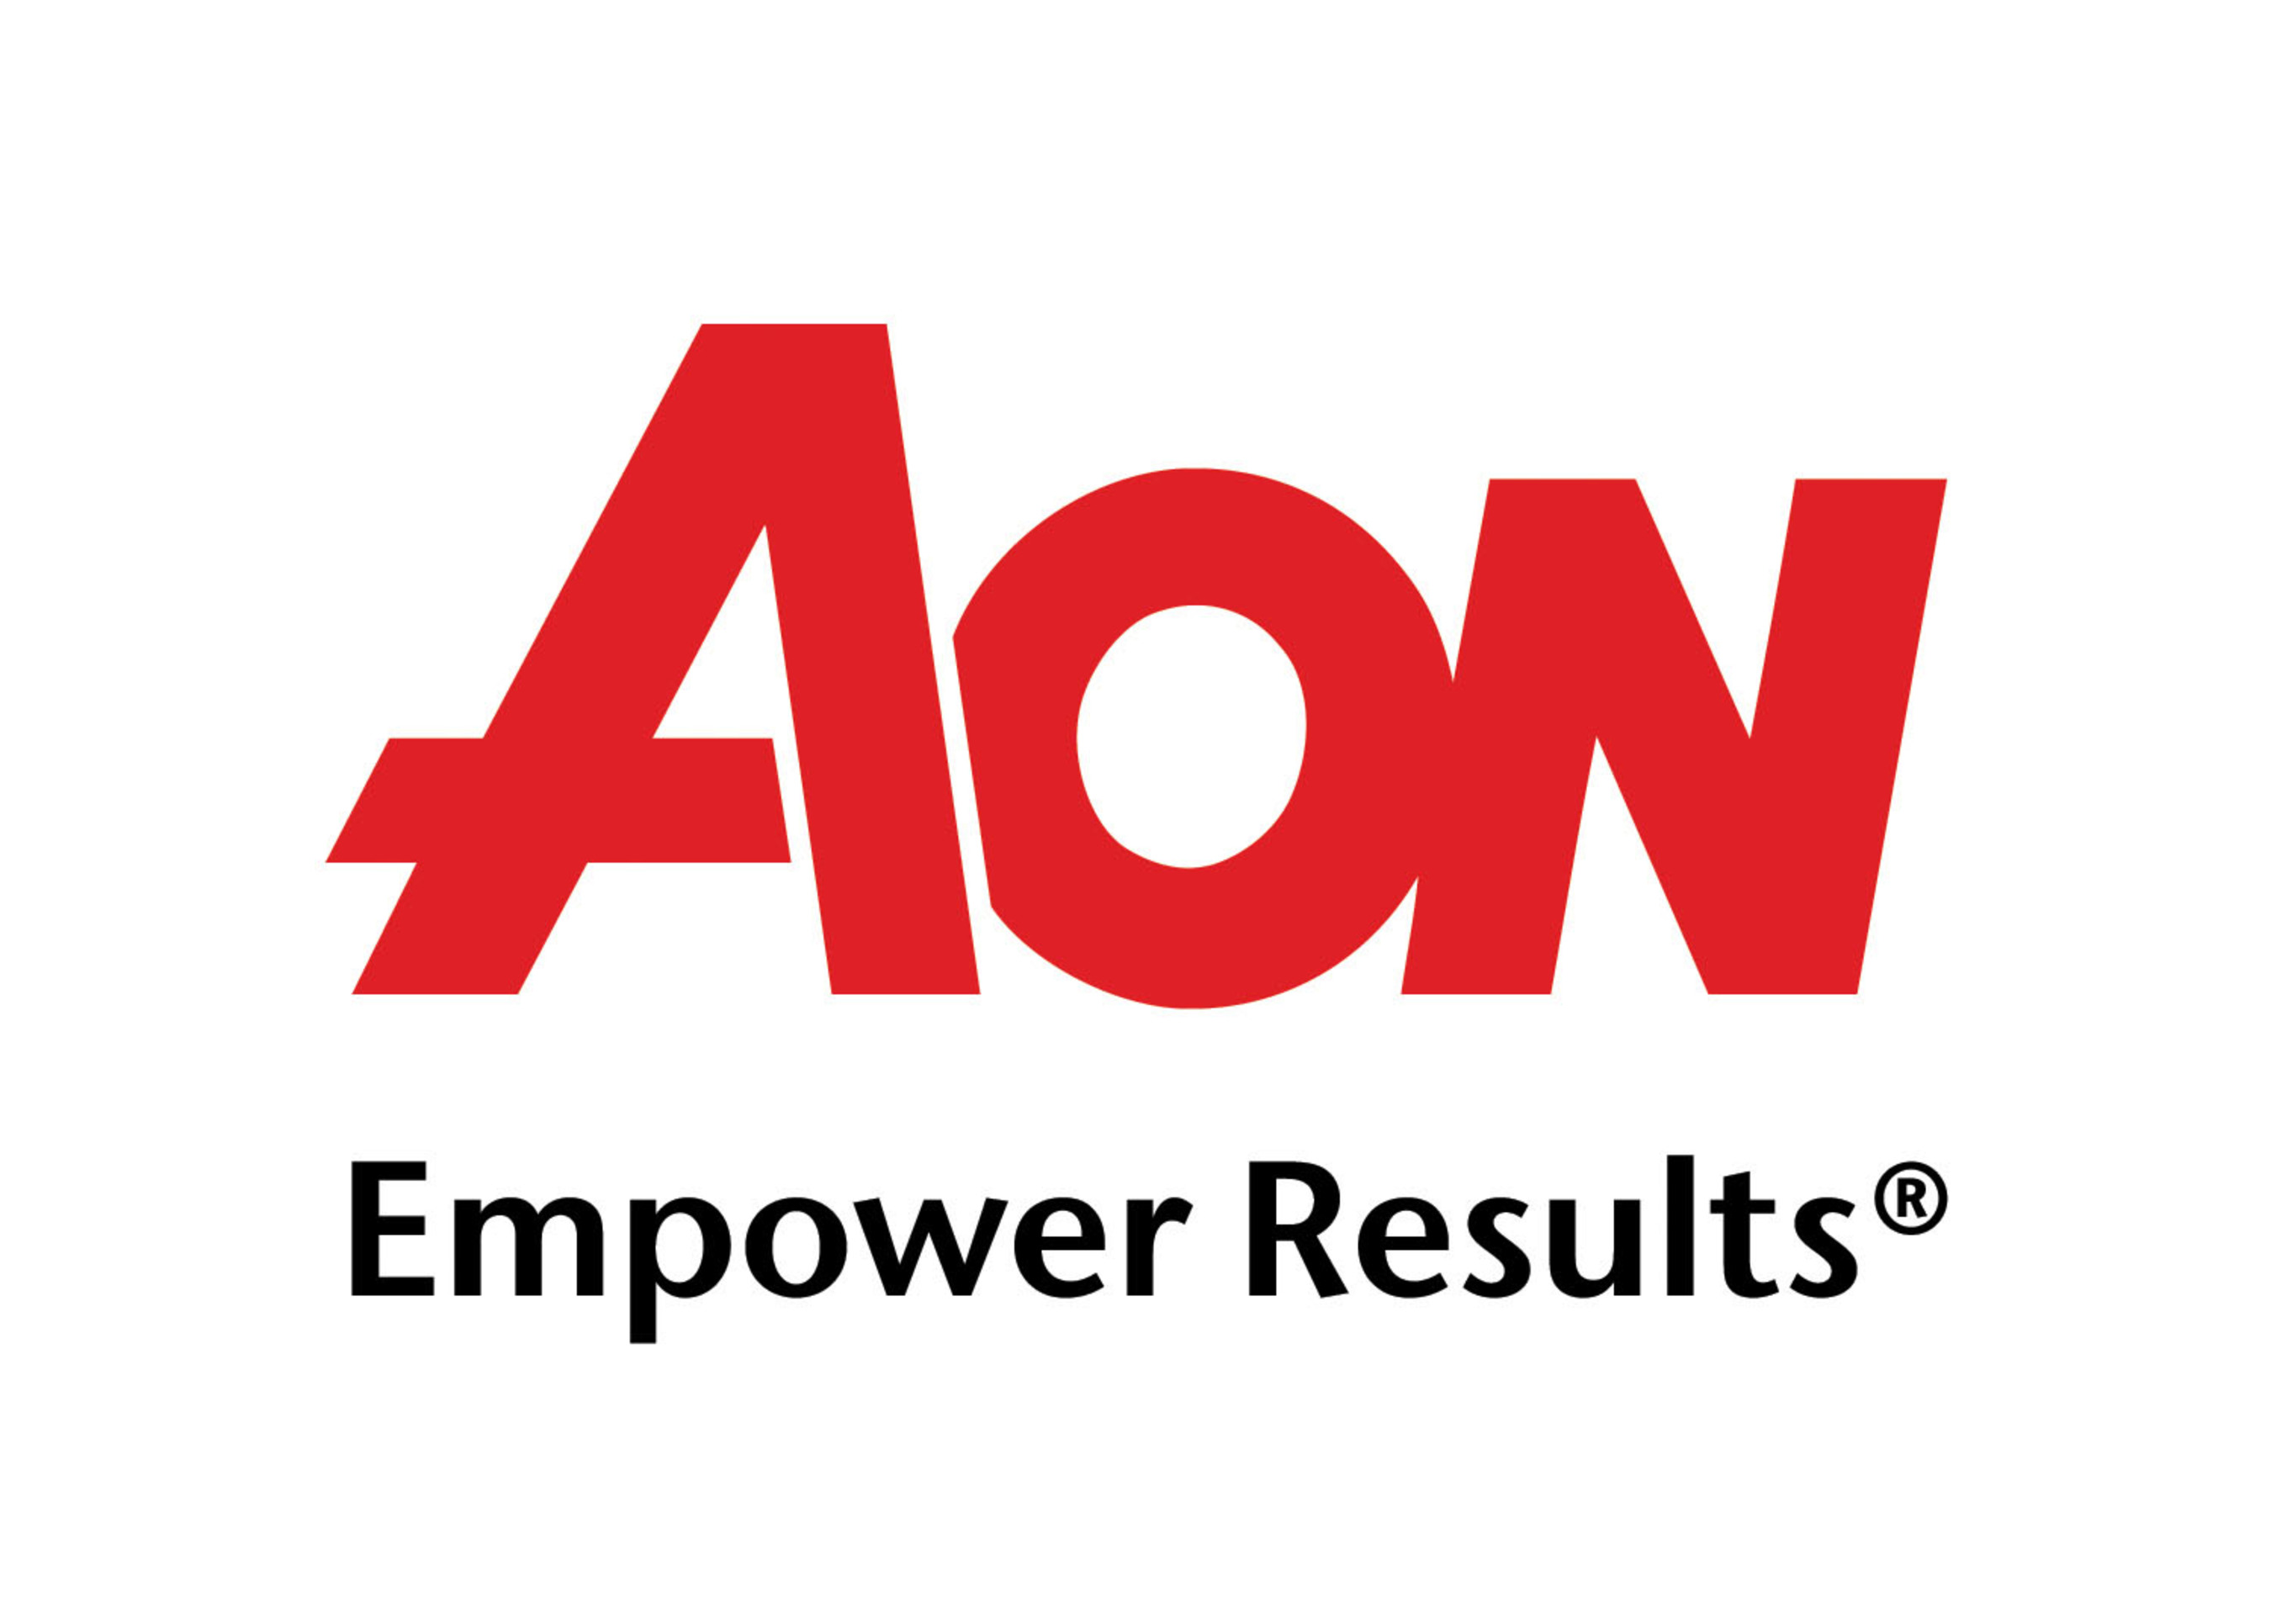 Aon plc ( http://www.aon.com ) is a leading global provider of risk management, insurance brokerage and reinsurance brokerage, and human resources solutions and outsourcing services. Through its more than 72,000 colleagues worldwide, Aon unites to empower results for clients in over 120 countries via innovative risk and people solutions. For further information on our capabilities and to learn how we empower results for clients, please visit:  http://aon.mediaroom.com . (PRNewsFoto/Aon Corporation) (PRNewsFoto/)